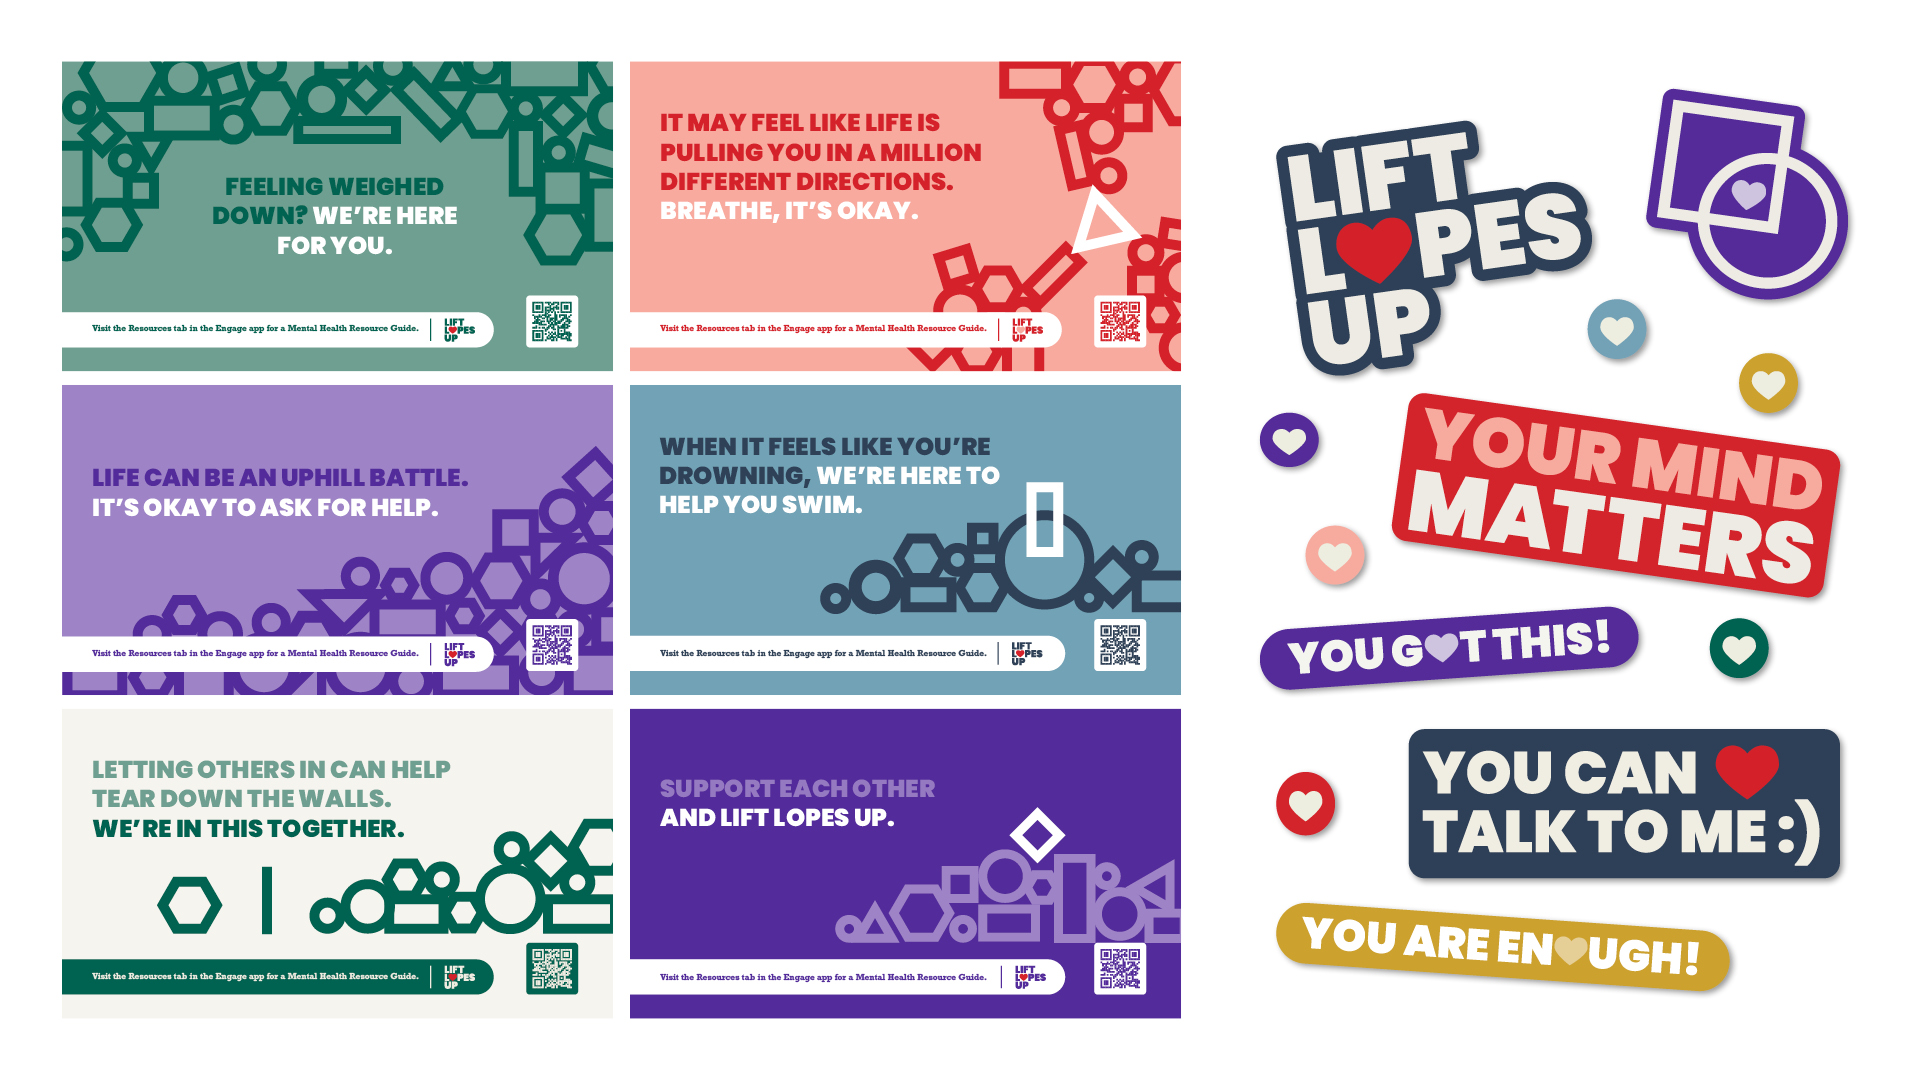 featured image five:Lift Lopes Up: Mental Health Campaign